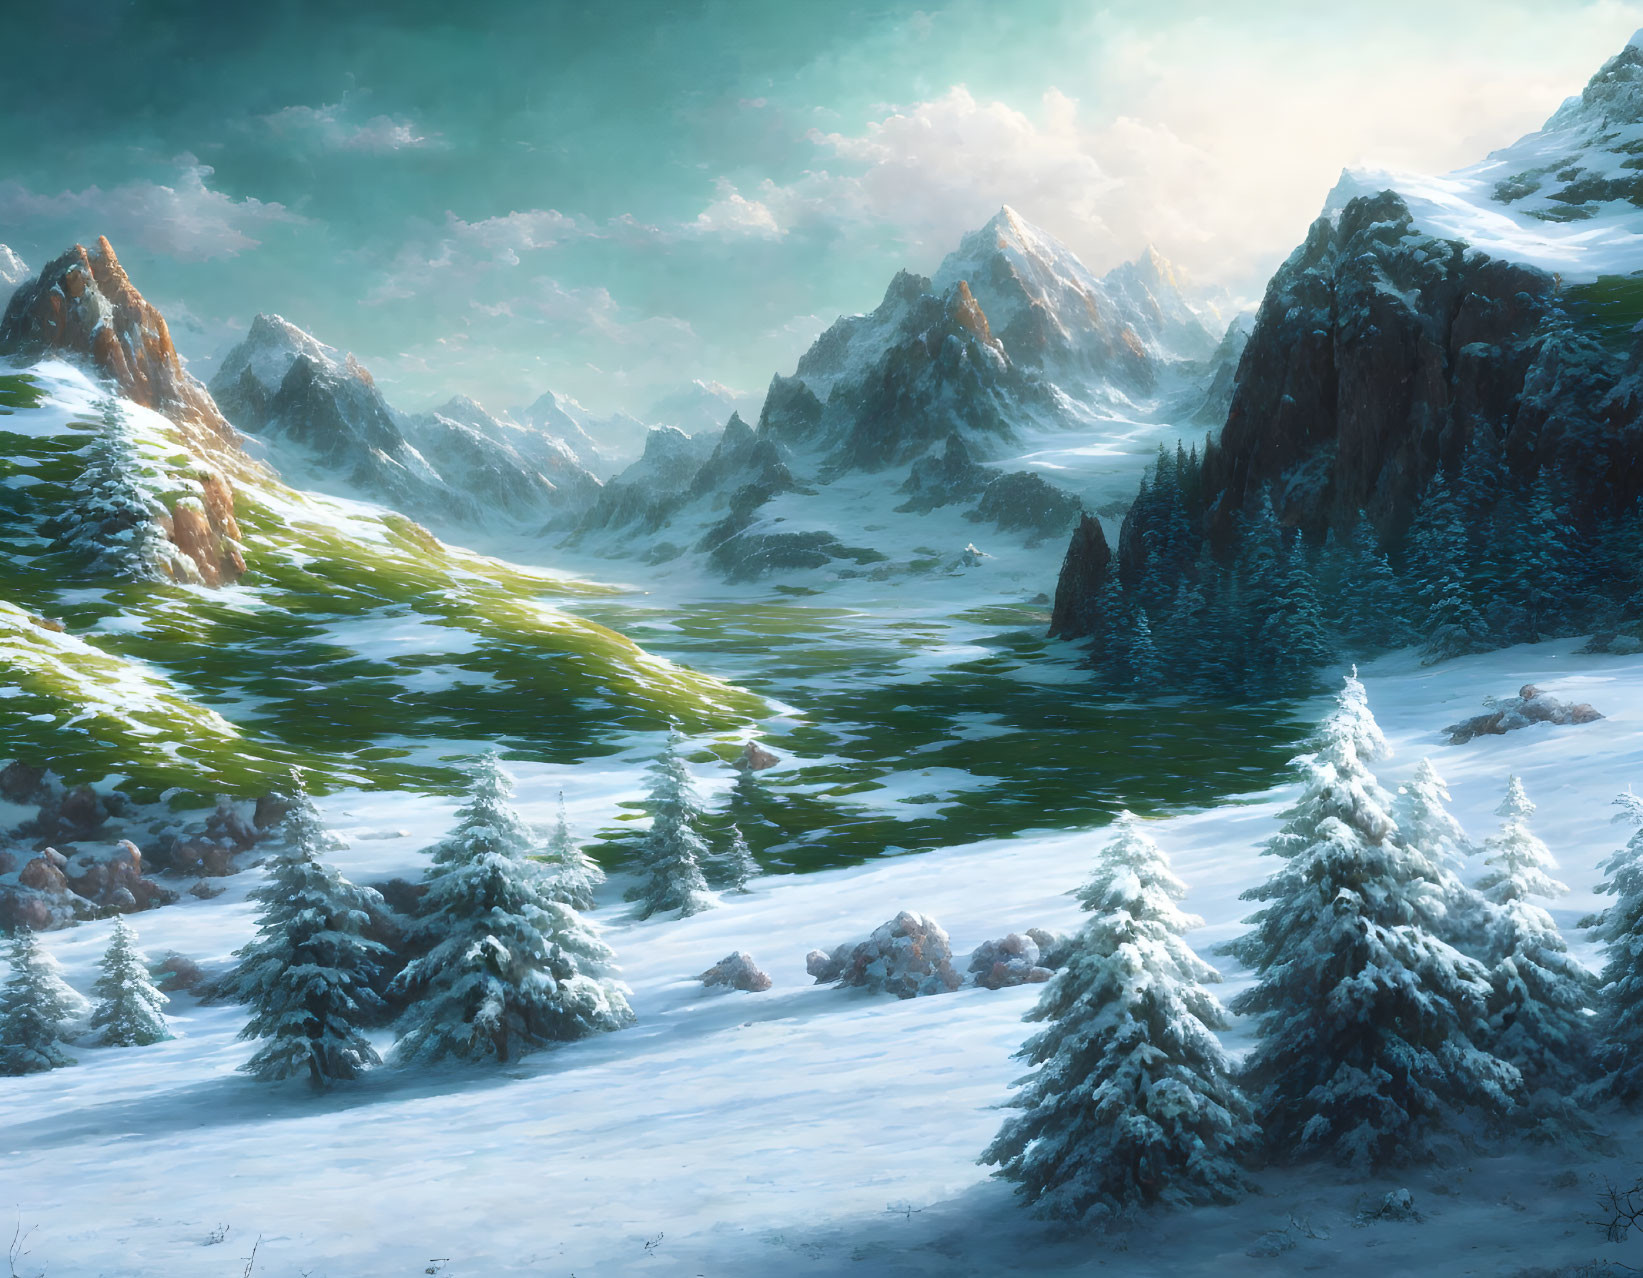 Snowy Landscape with Pine Trees, Melting Snow, and Majestic Mountains